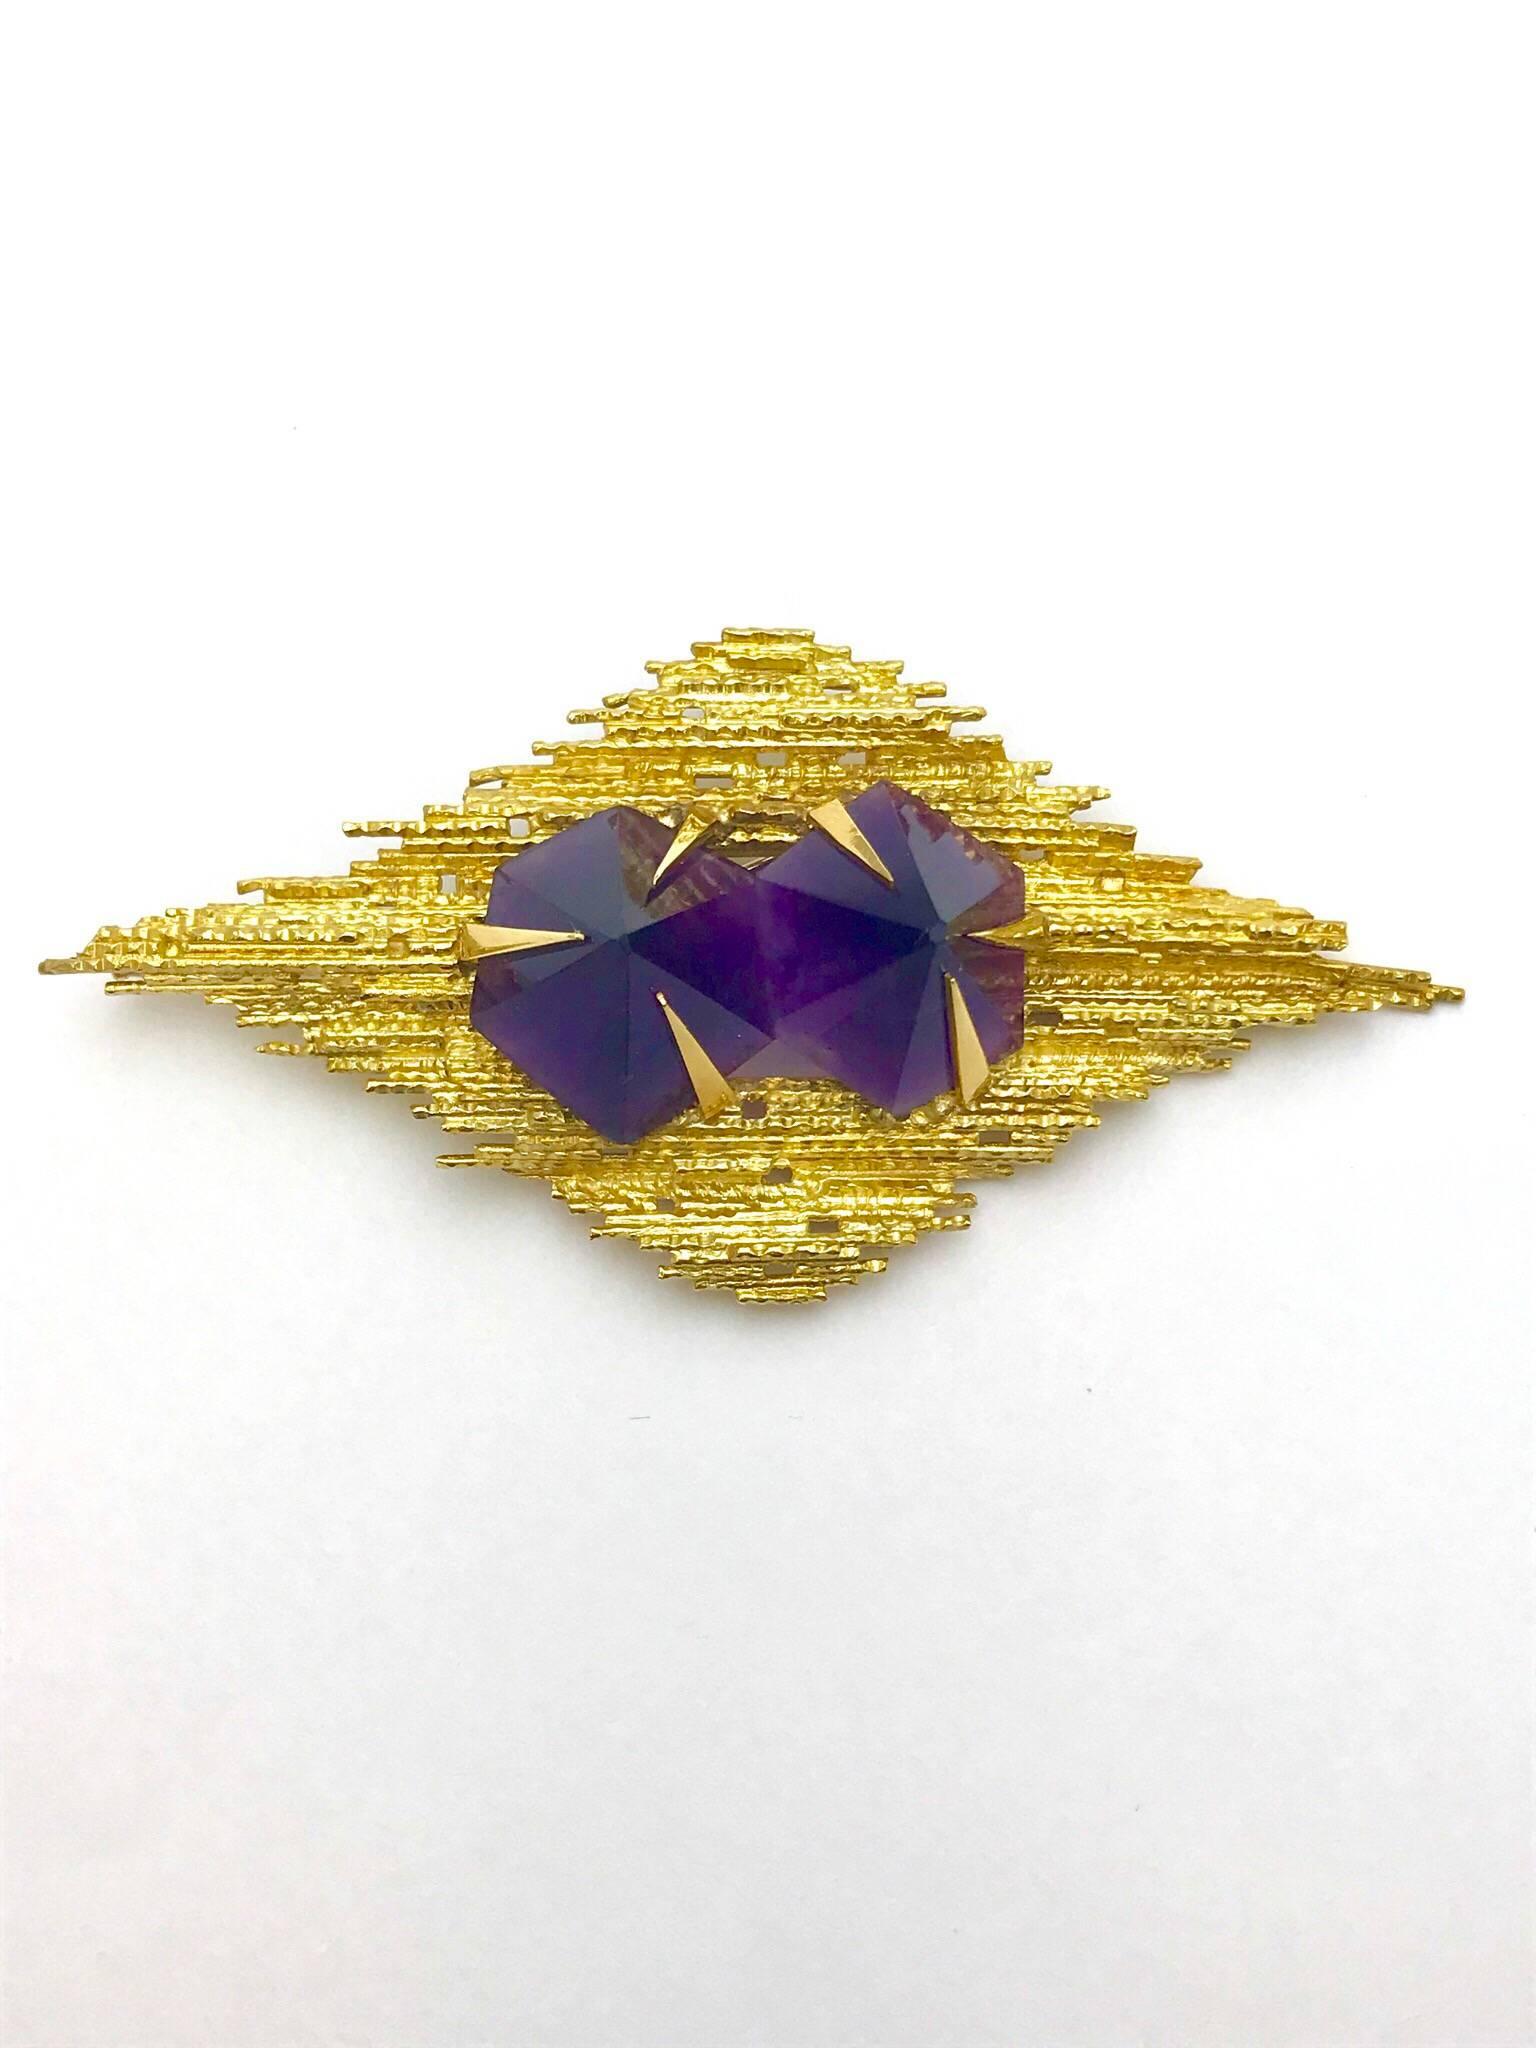 An Andrew Grima amethyst and 18 karat yellow gold pendant brooch. created in the fashion of many of his pieces, the two conical cut amethyst have a total weight of 45.80 carats, set with large pointed prongs, in a textured yellow gold frame.  The